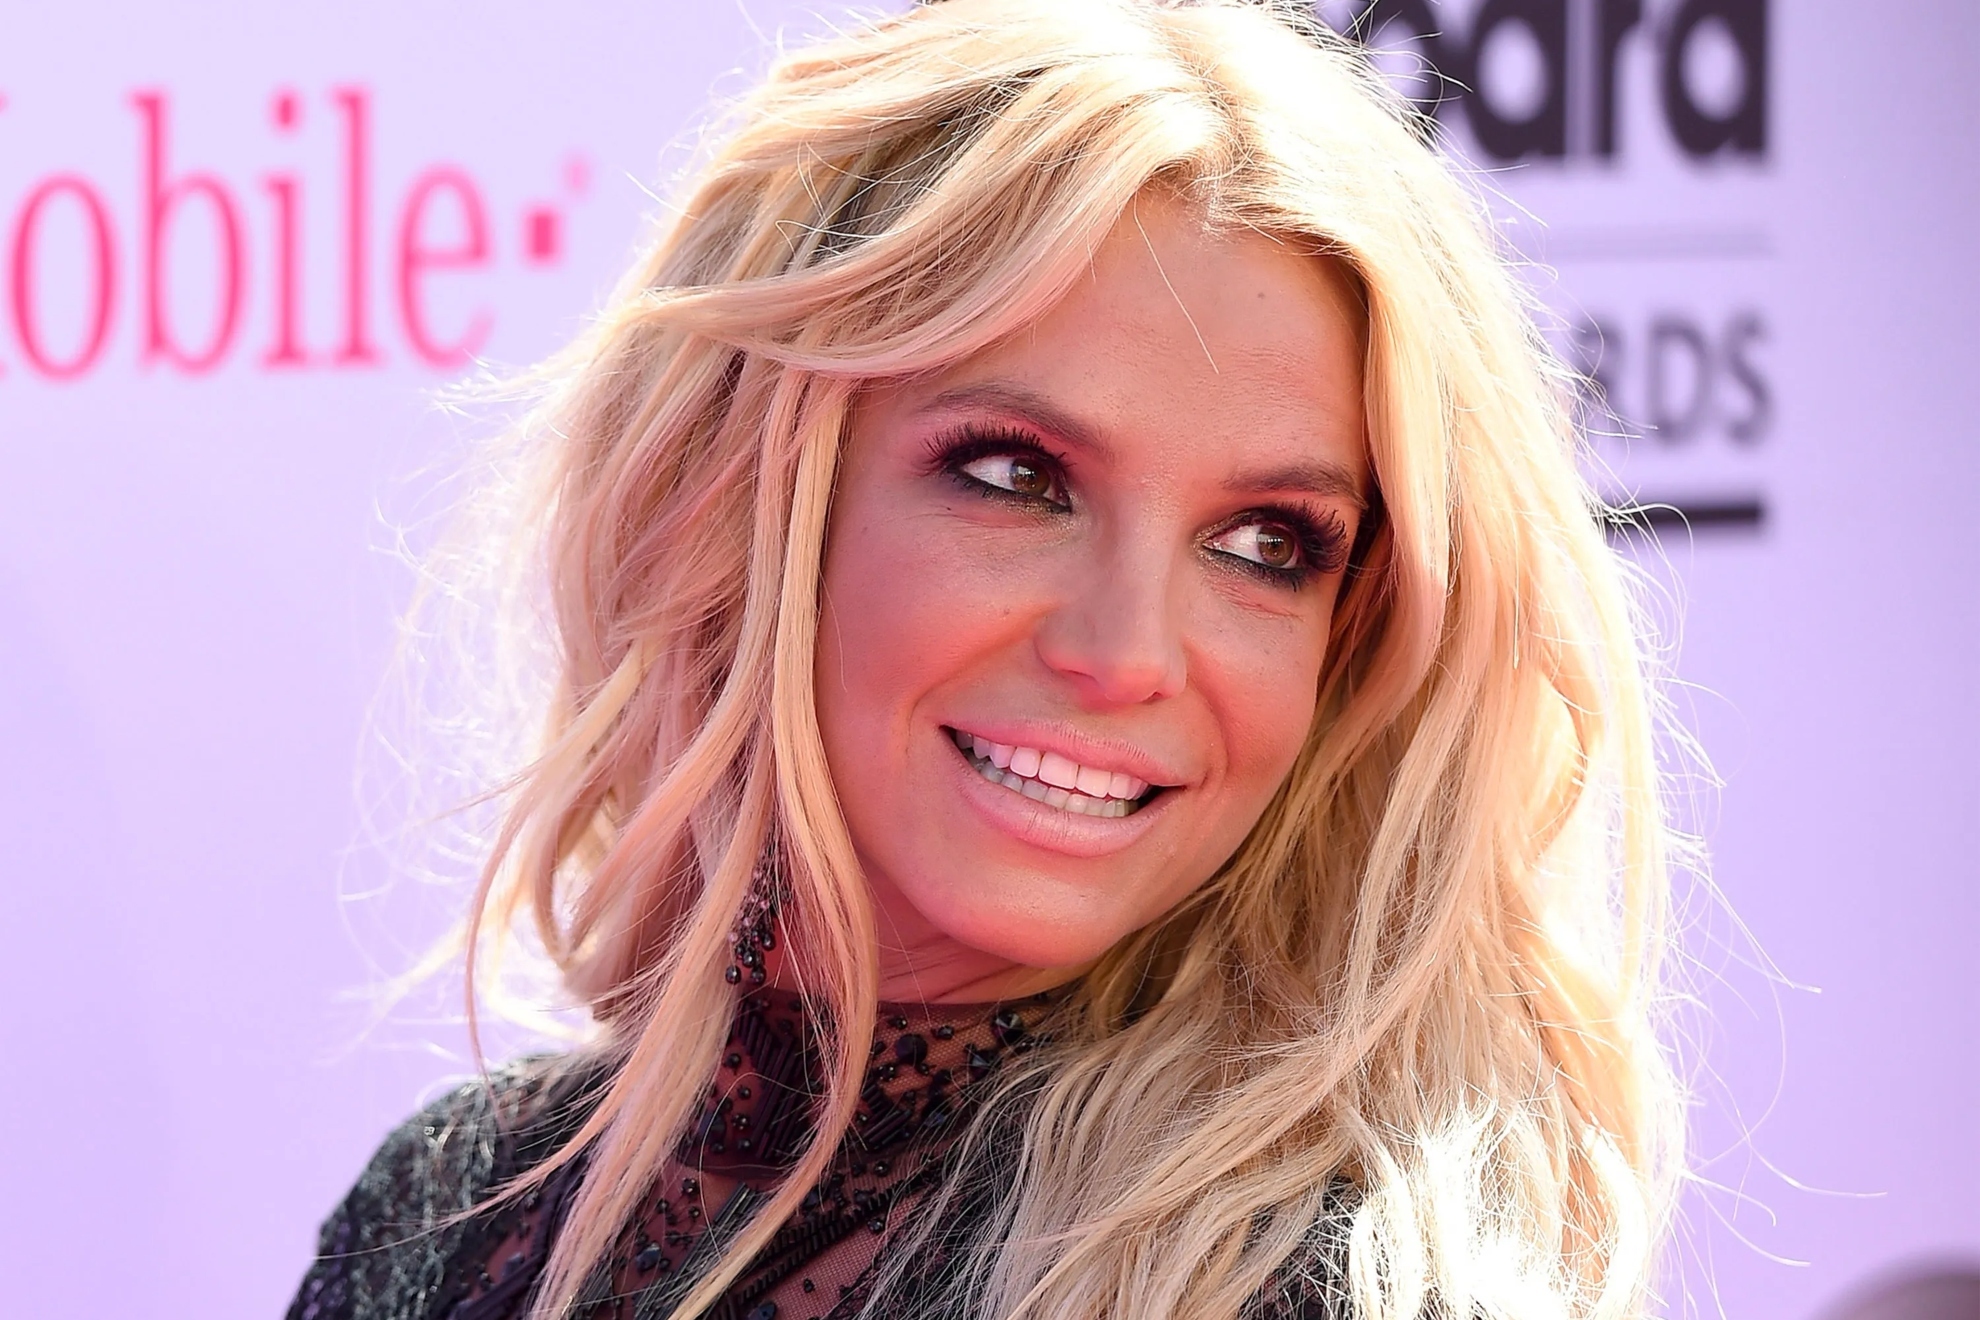 Britney Spears has all but announced her retirment from music